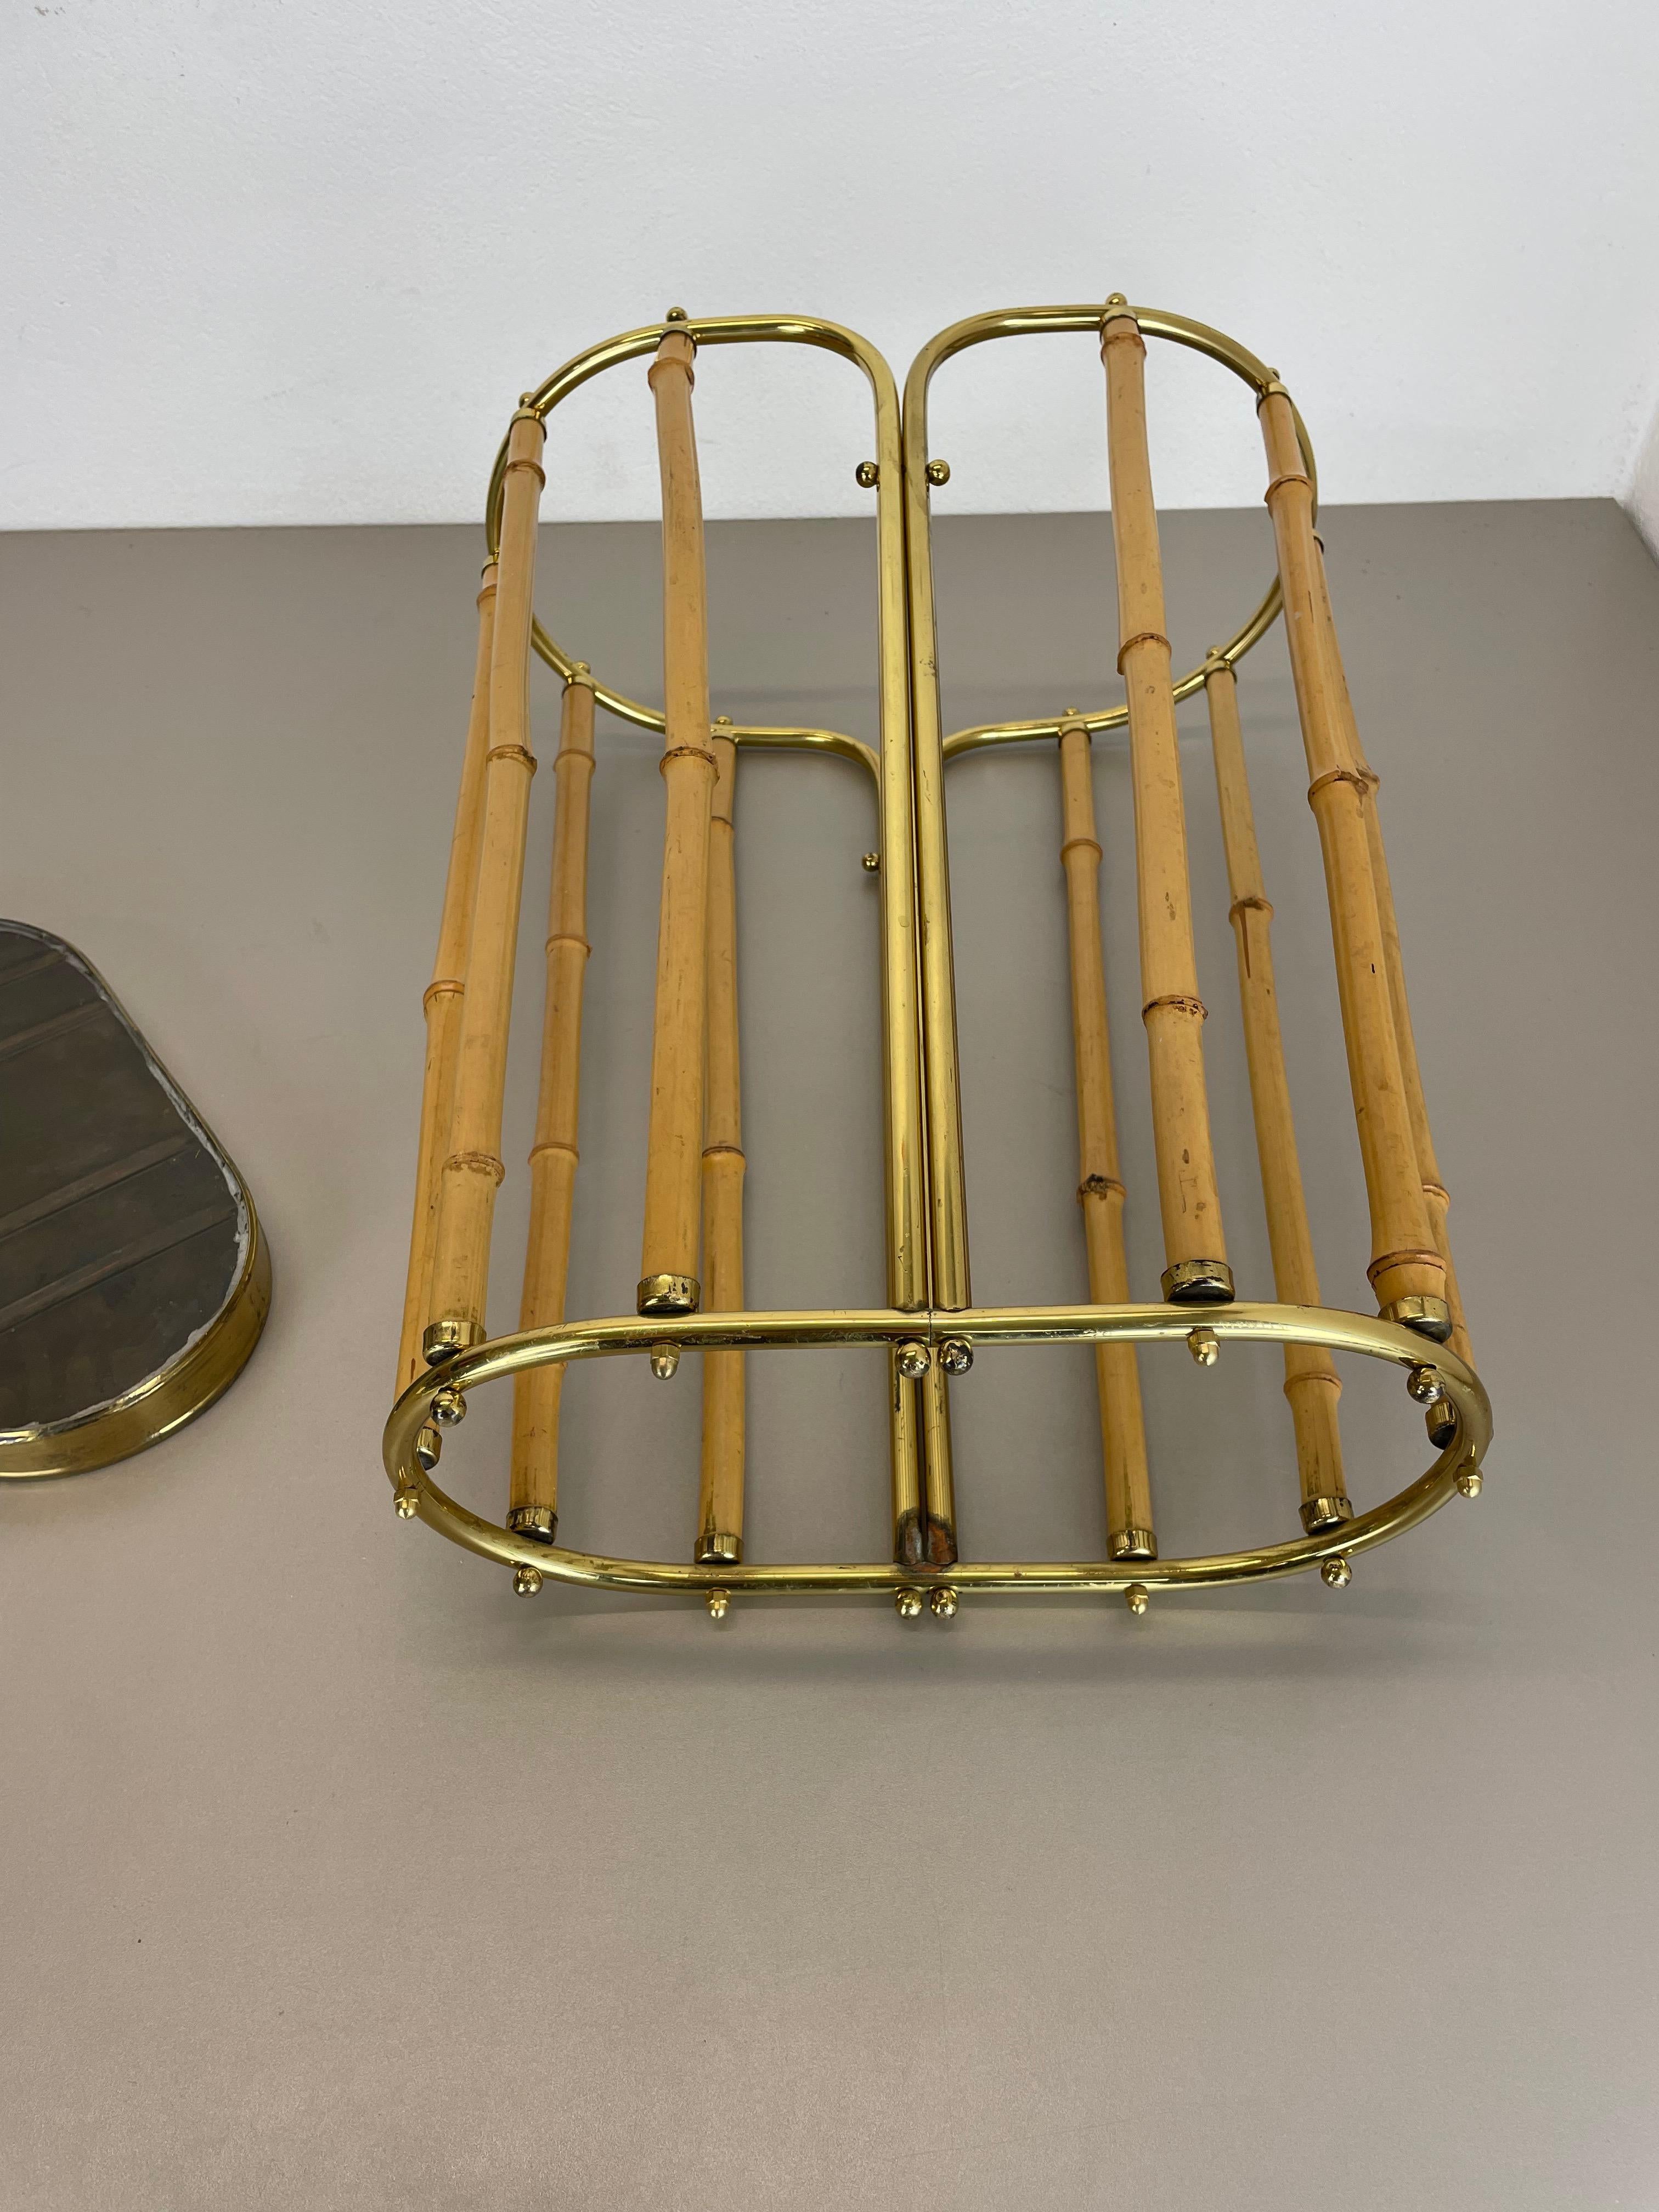 Hollywood Regency Auböck Style Brass Bamboo Umbrella Stand, Austria, 1950s For Sale 13